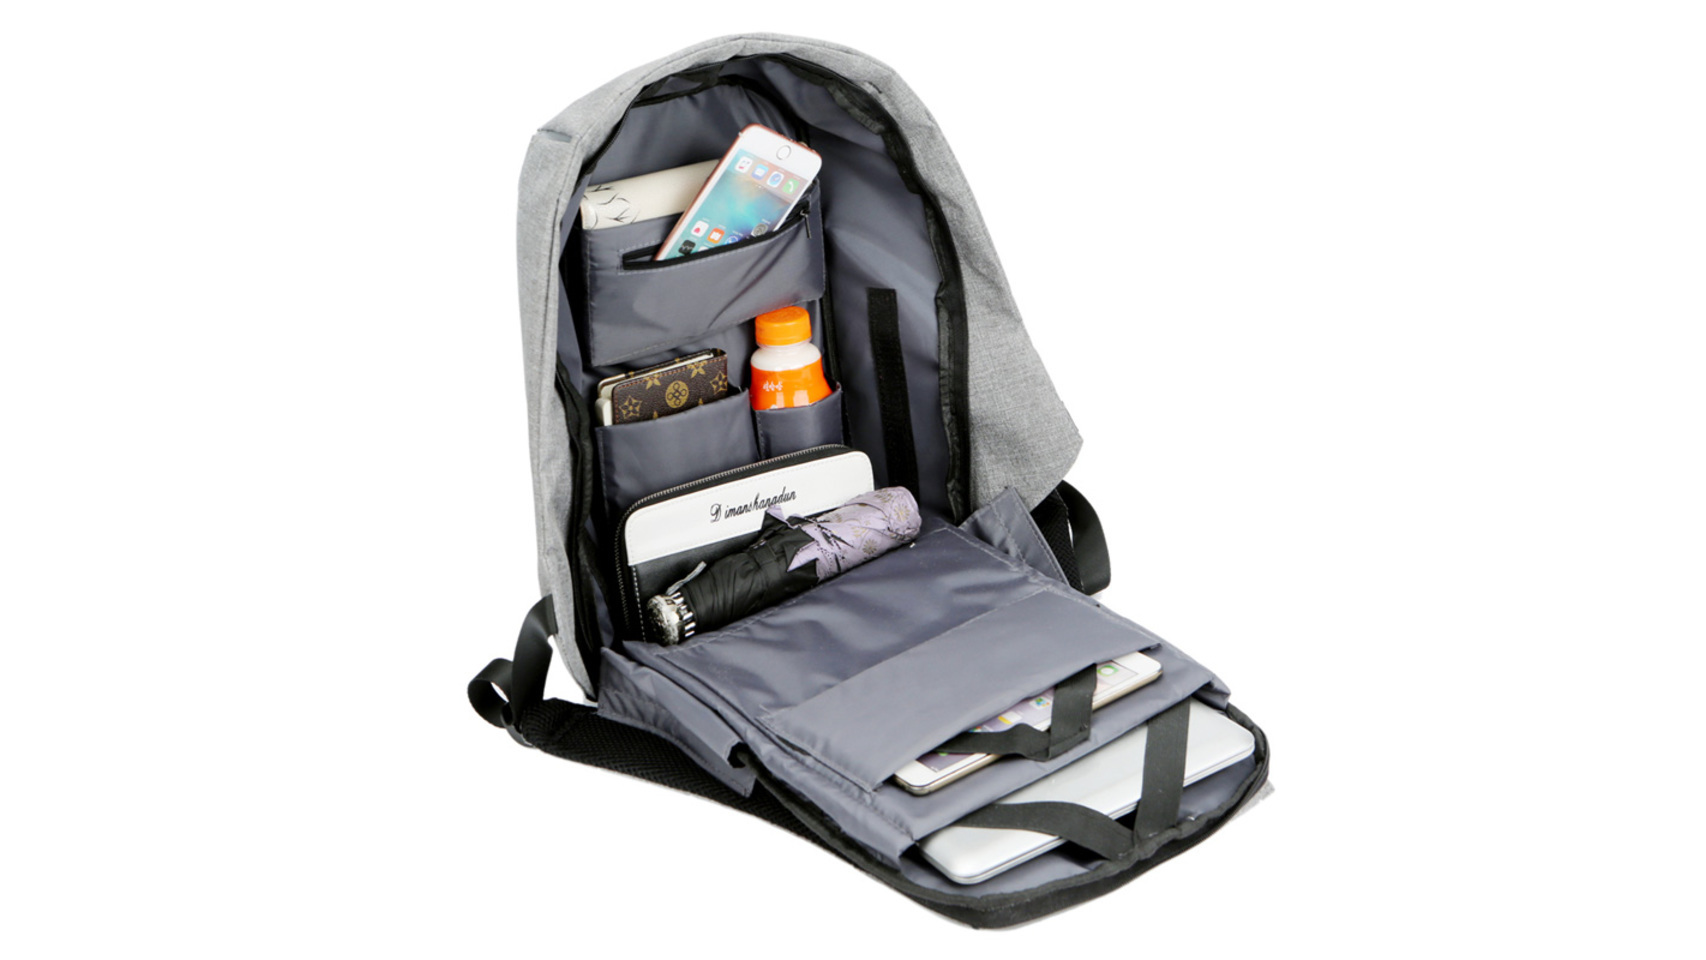 Bobby-backpack-Waterproof-XD-DESIGN-Security-Multi-Function-Backpack-School-Reversible-with-USB-Charging-Port-Laptop